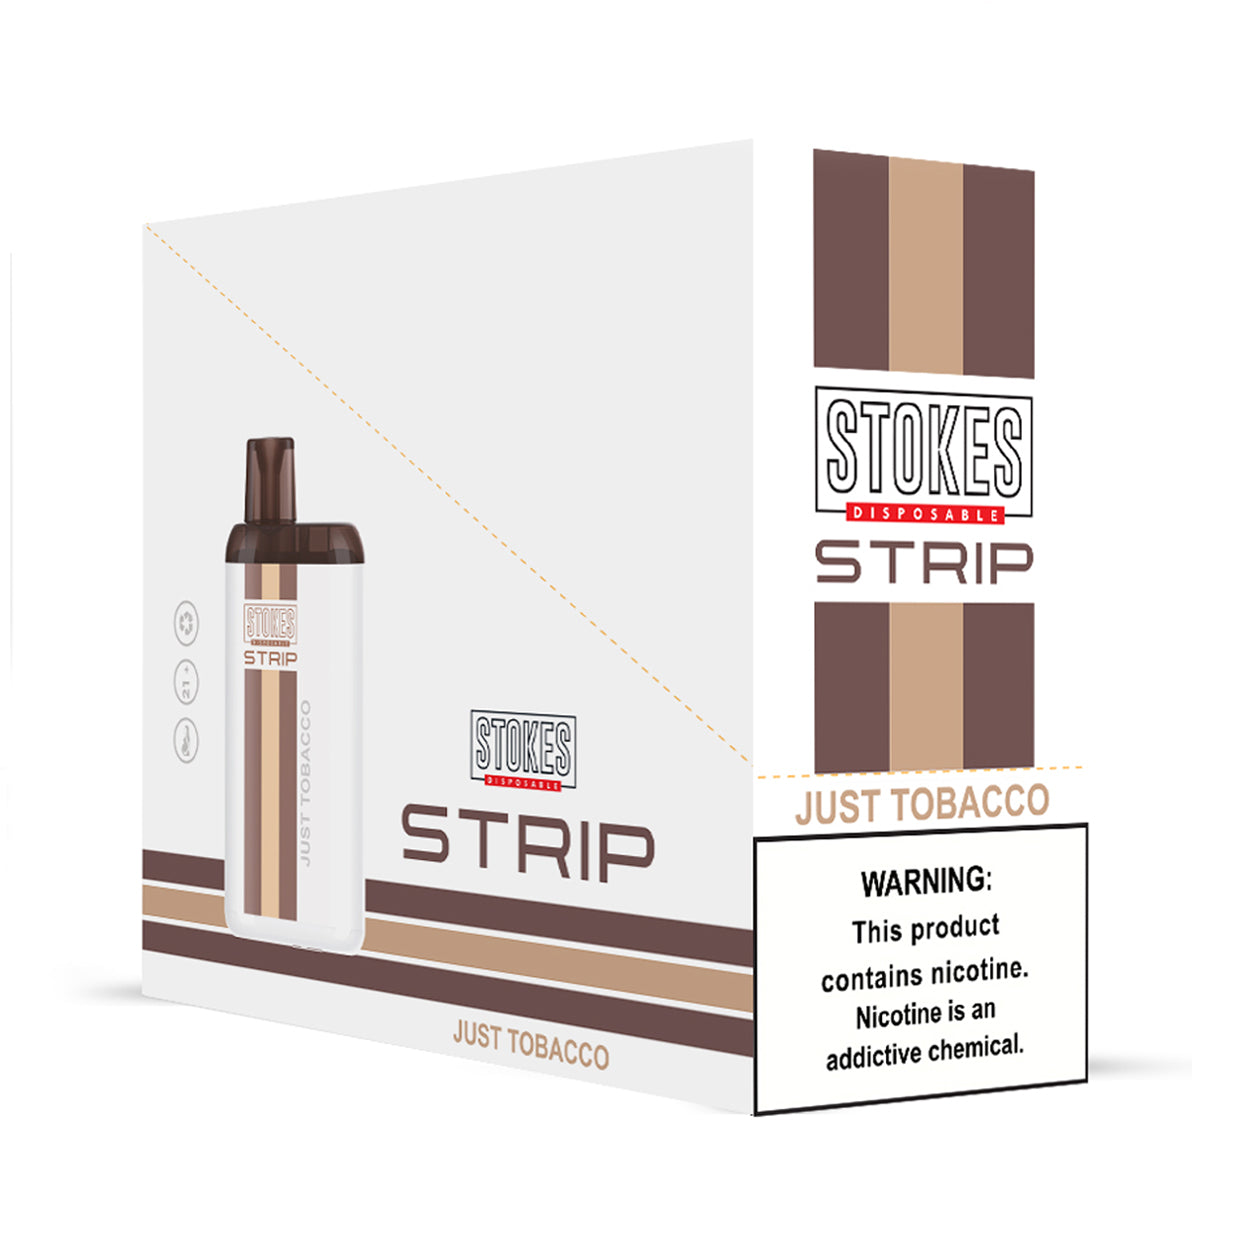 STOKES Strip - 5% Nic. (Disposable Device) - 4000 puffs - Just Tobacco